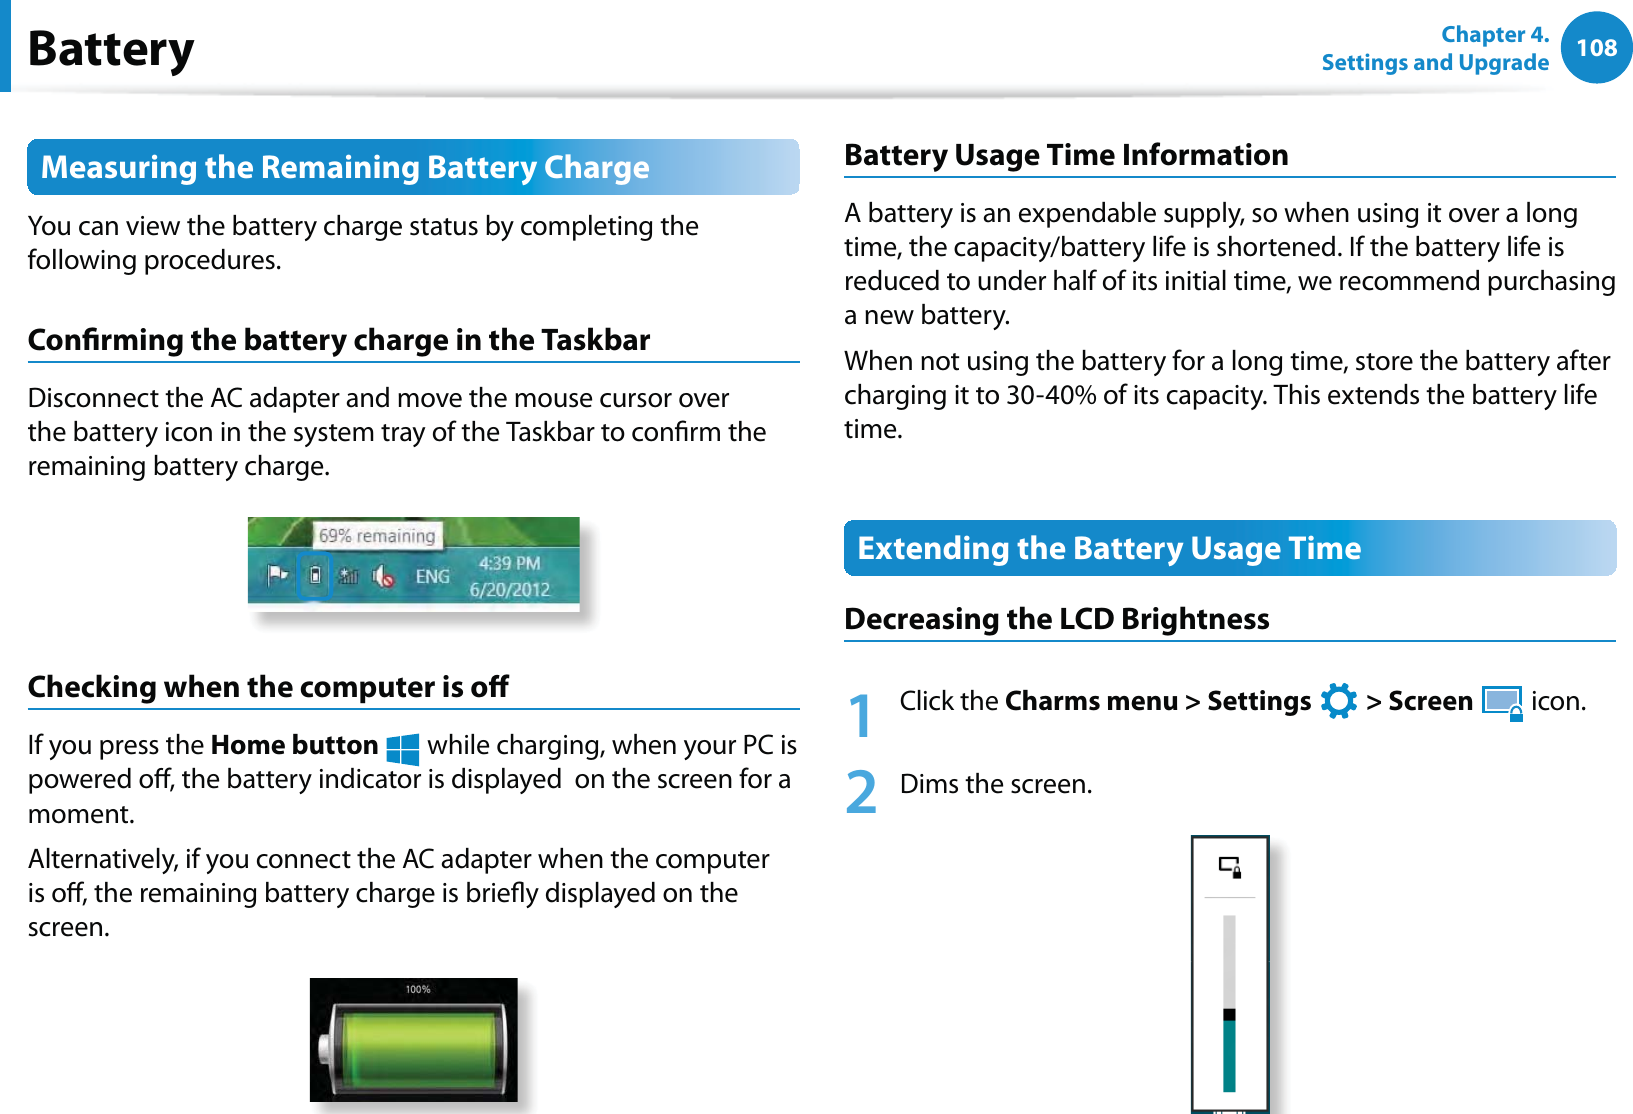 108Chapter 4. Settings and UpgradeBatteryMeasuring the Remaining Battery ChargeYou can view the battery charge status by completing the following procedures.Conrming the battery charge in the TaskbarDisconnect the AC adapter and move the mouse cursor over the battery icon in the system tray of the Taskbar to conrm the remaining battery charge.Checking when the computer is oIf you press the Home button  while charging, when your PC is powered o, the battery indicator is displayed  on the screen for a moment.Alternatively, if you connect the AC adapter when the computer is o, the remaining battery charge is briey displayed on the screen.Battery Usage Time InformationA battery is an expendable supply, so when using it over a long time, the capacity/battery life is shortened. If the battery life is reduced to under half of its initial time, we recommend purchasing a new battery.When not using the battery for a long time, store the battery after charging it to 30-40% of its capacity. This extends the battery life time.Extending the Battery Usage TimeDecreasing the LCD Brightness1 Click the Charms menu &gt; Settings   &gt; Screen  icon.2  Dims the screen.